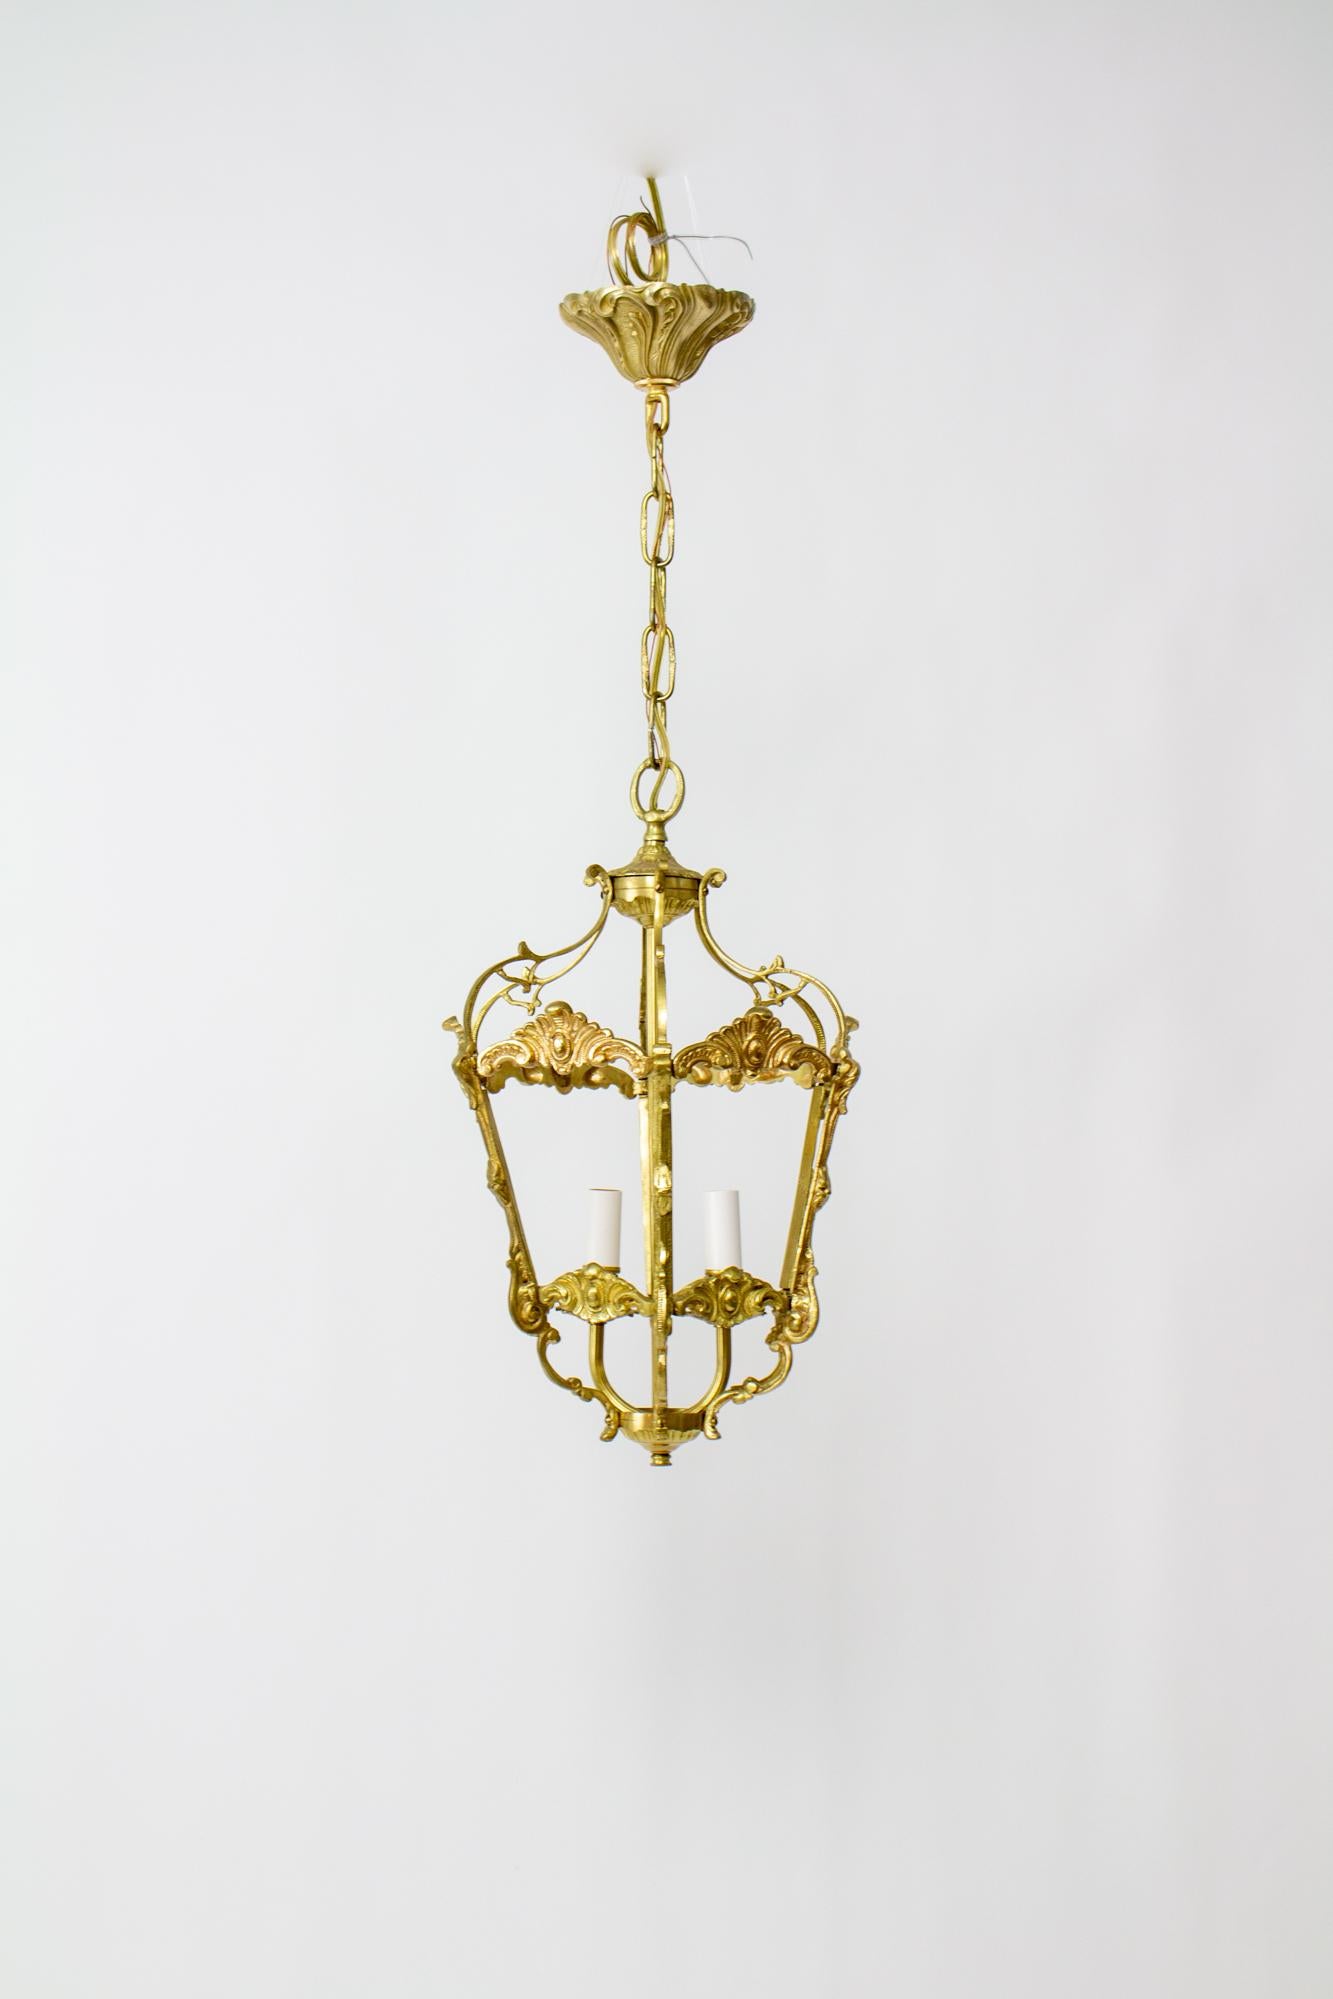 Rococo Early 20th Century Spanish Cast Brass Lantern For Sale